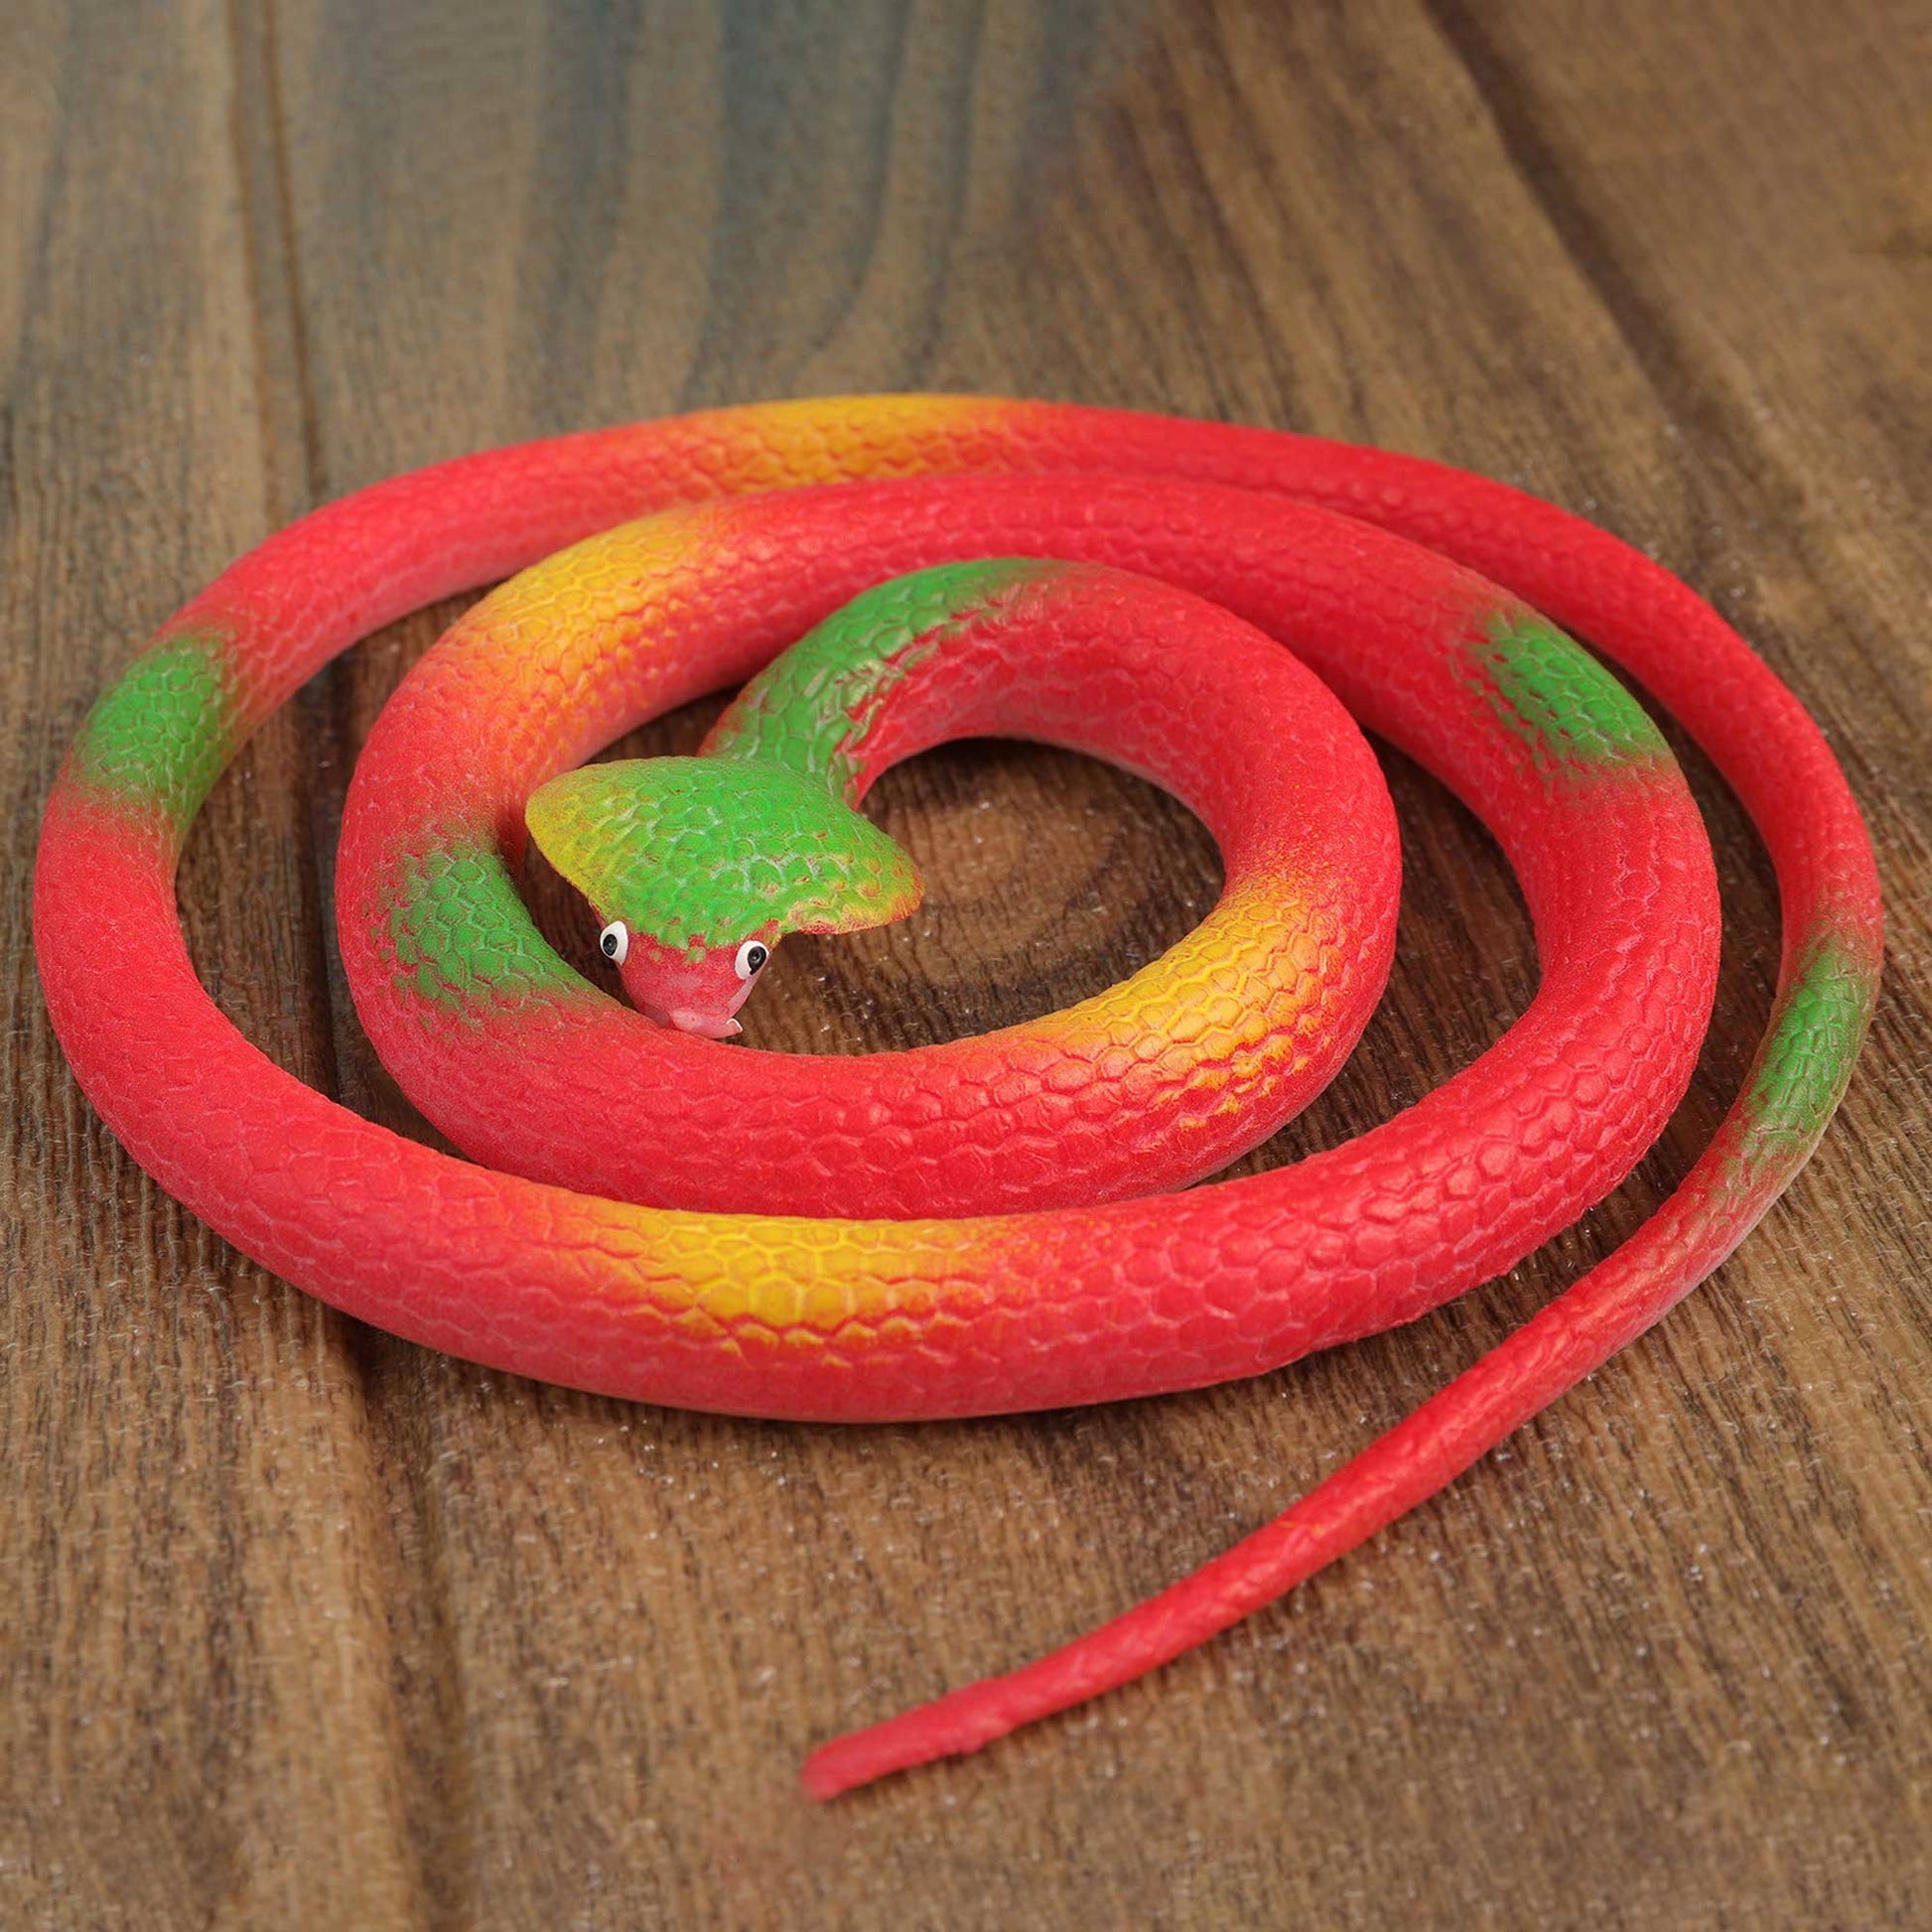 Kid's Realistic Rubber Snake Toy Toy RAM Red 